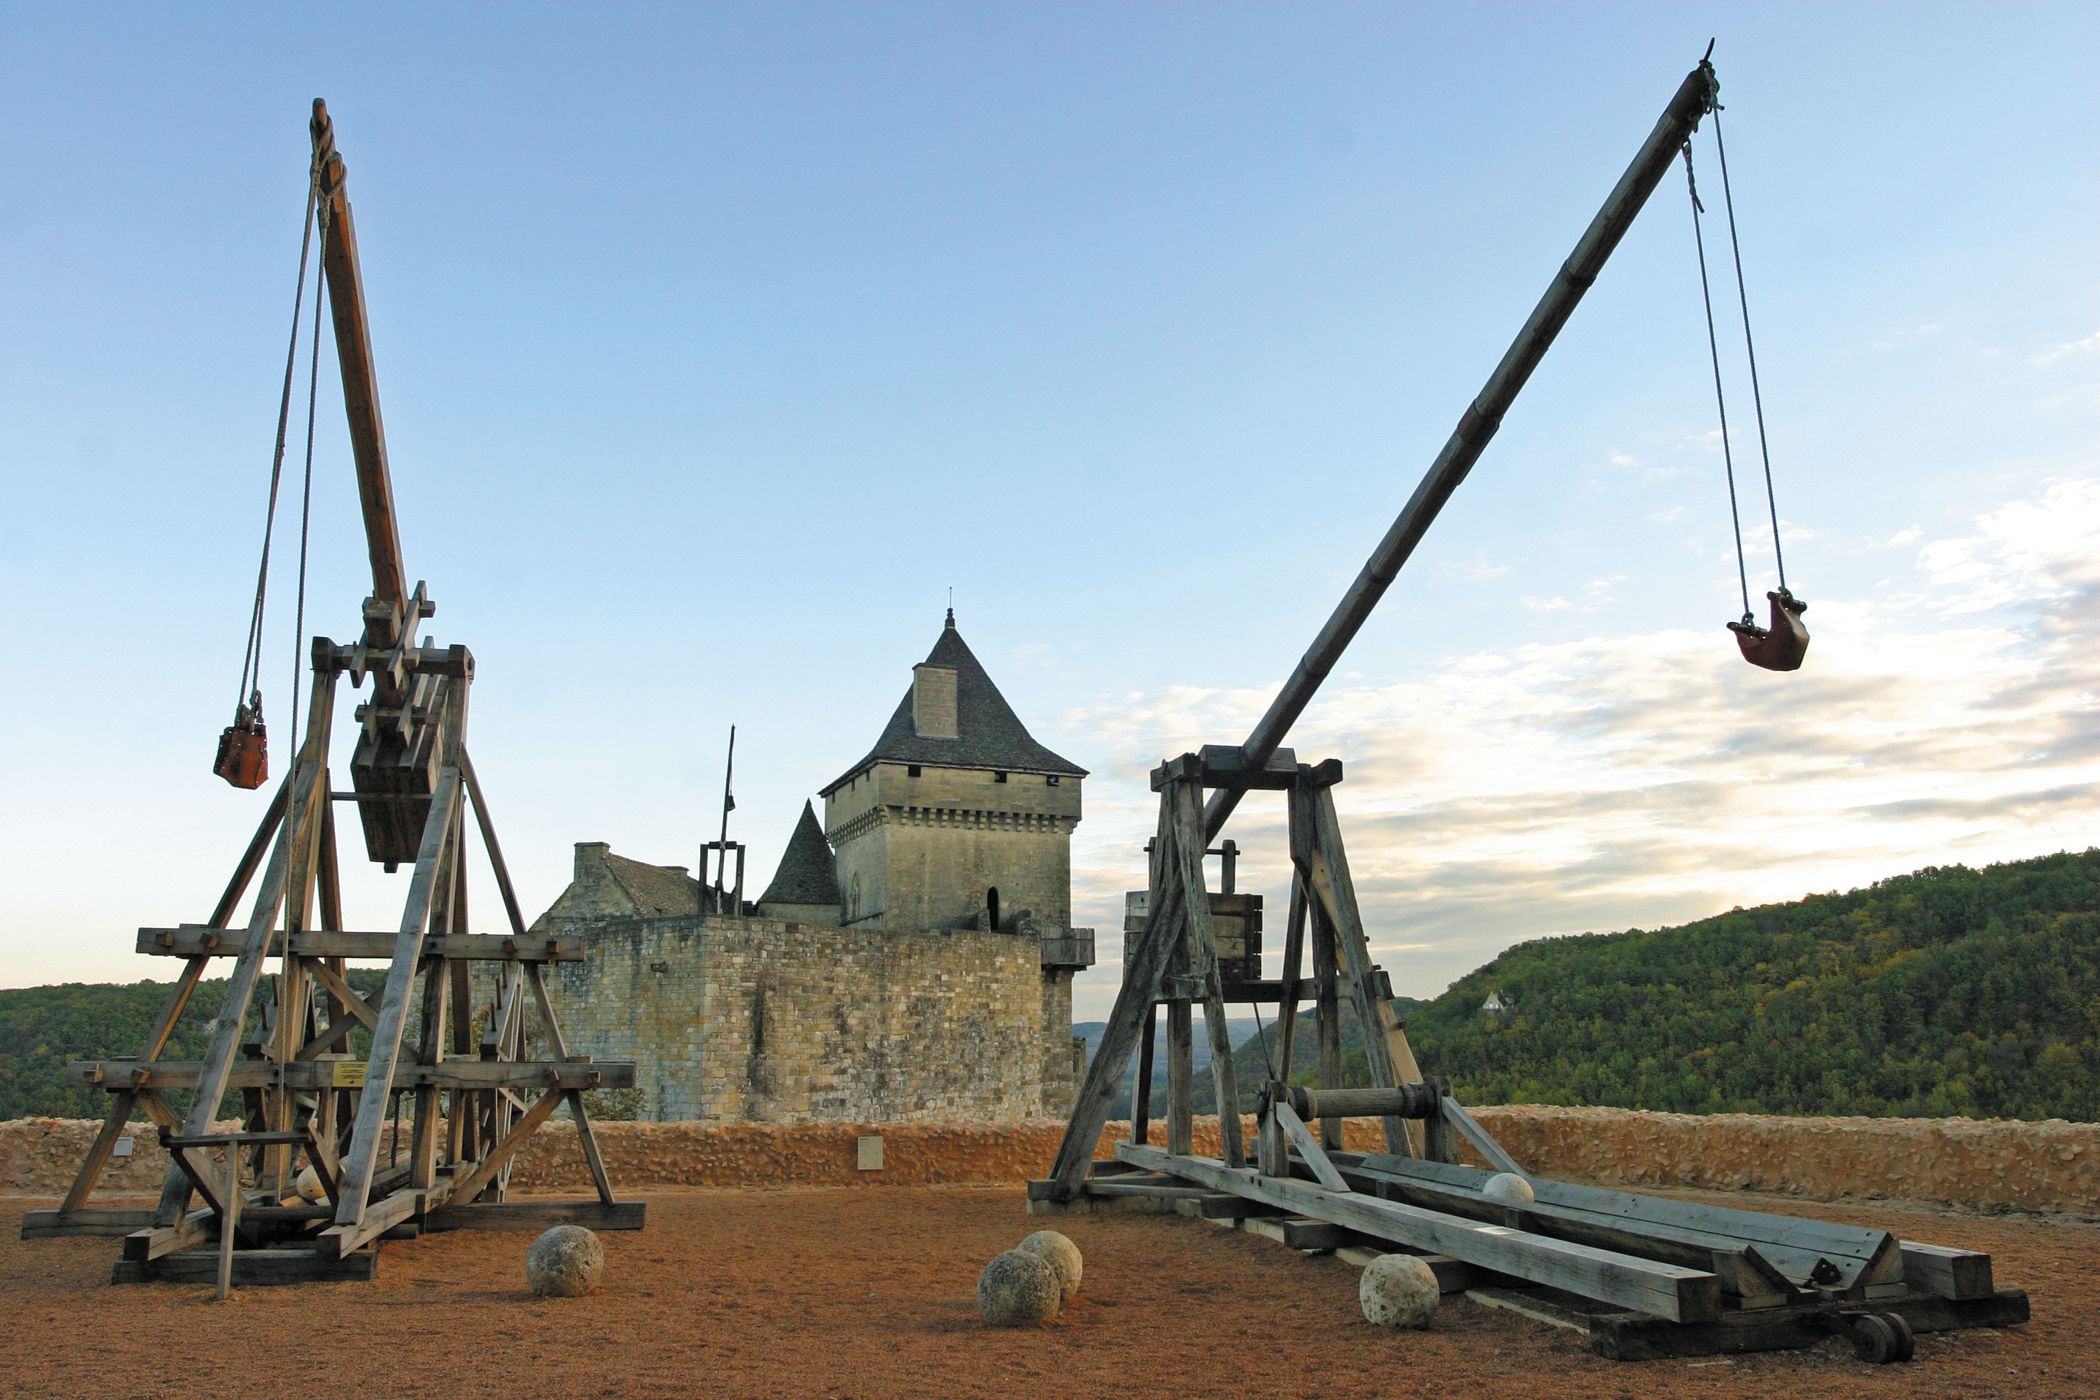 Working models of primitive iron bombards greet visitors to the castle museum.